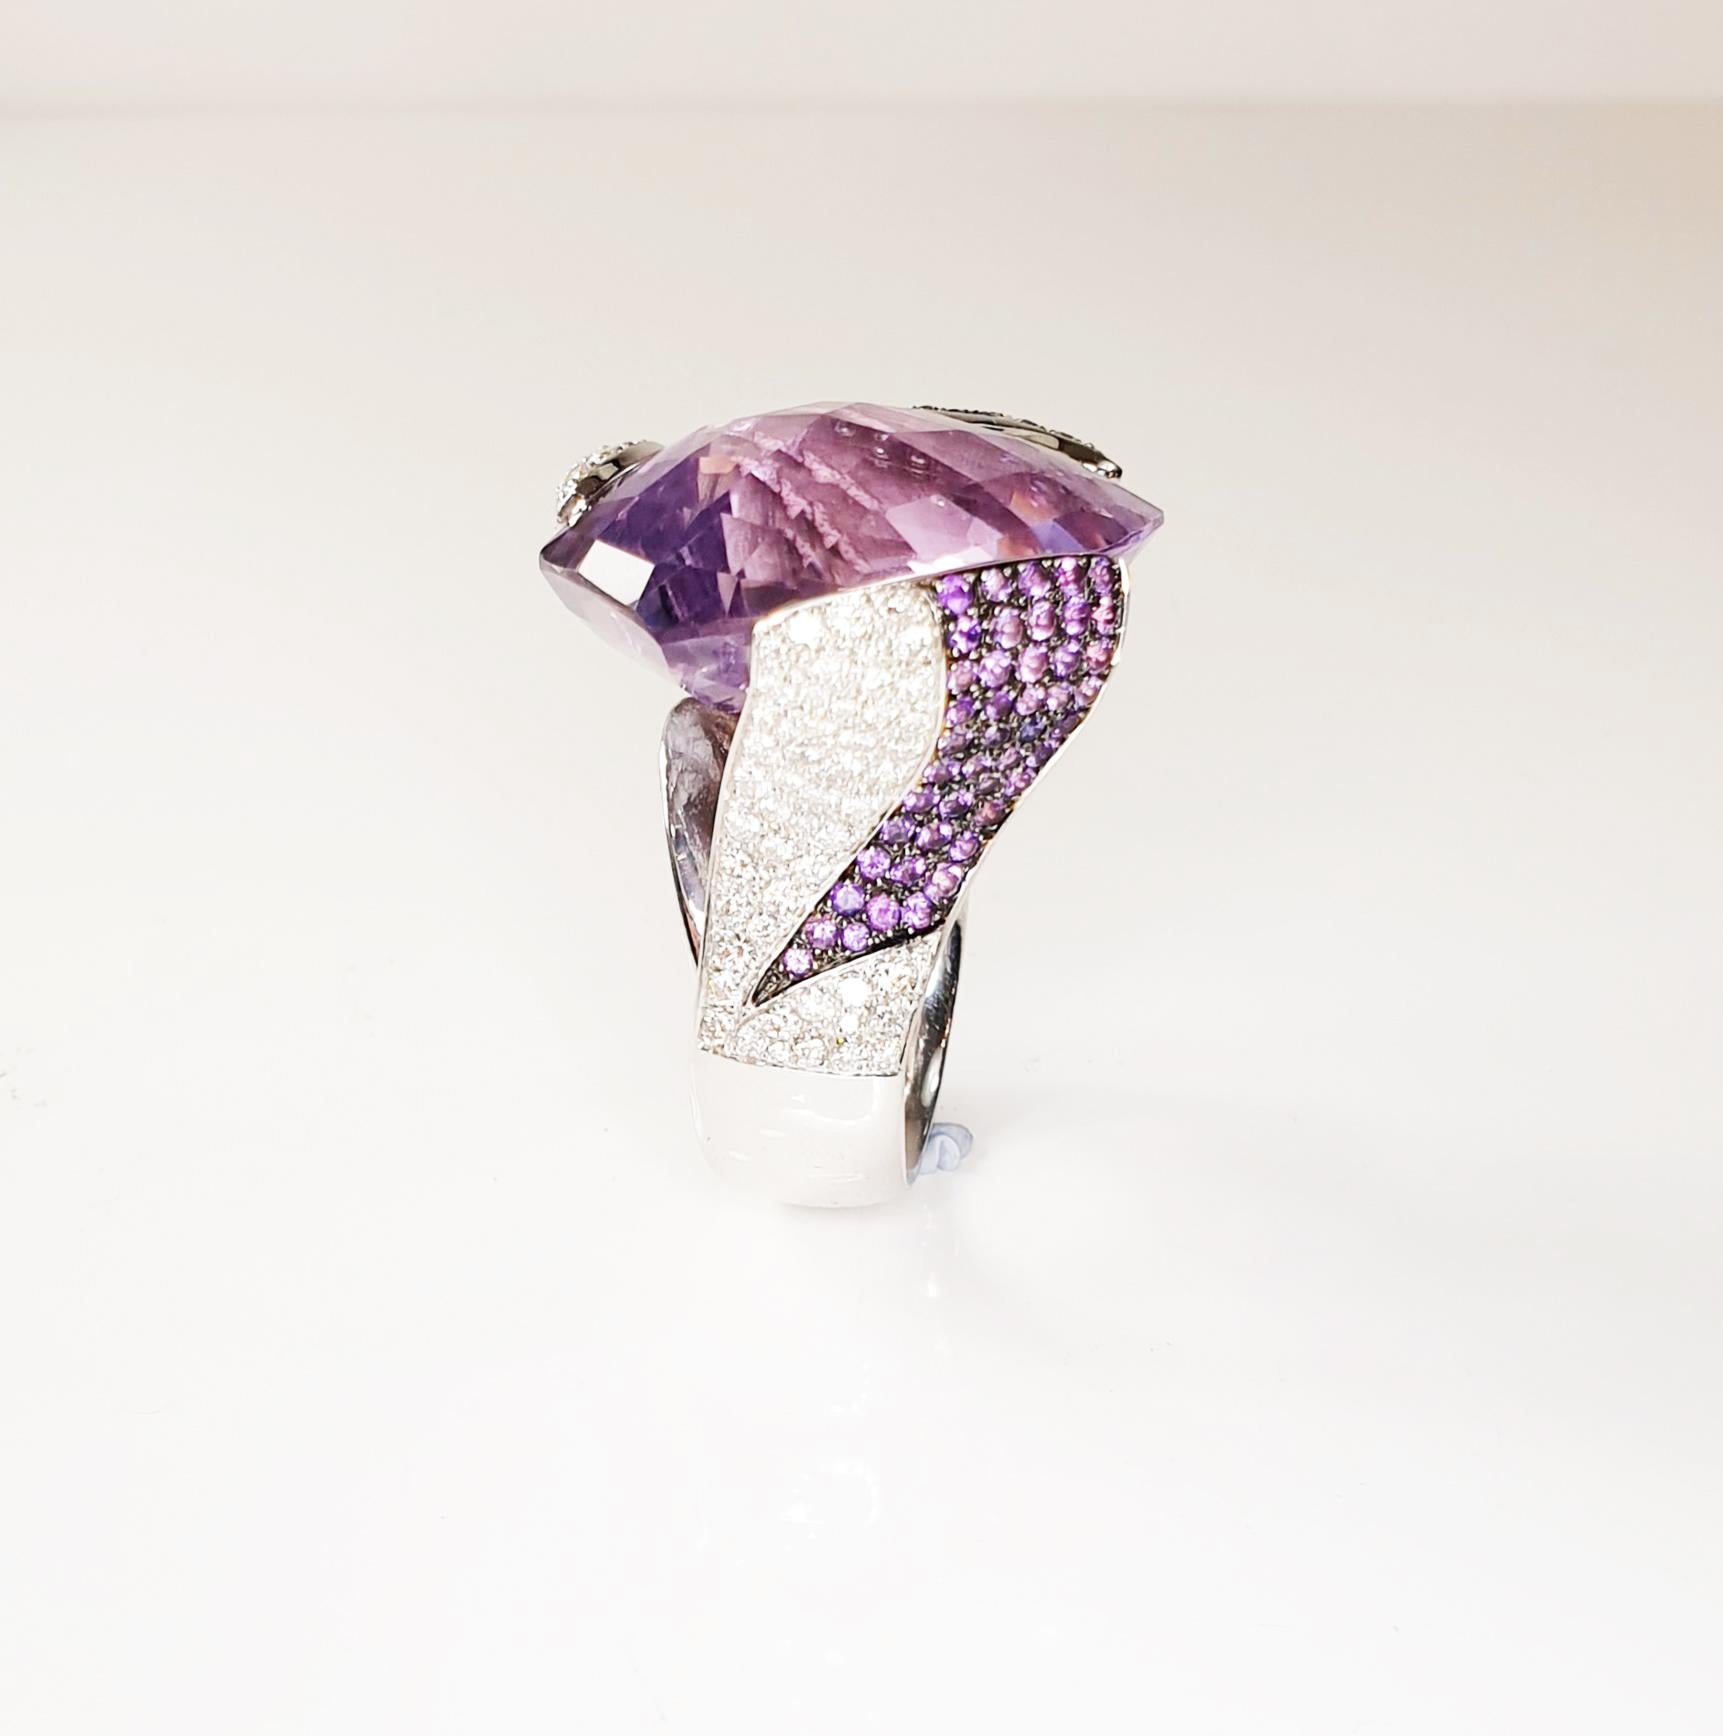 Multifaceted 32ct amethyst with Diamonds and 18k white gold ring 
Irama Pradera is a vdynamic and outgoing designer from Spain that searches always for the best gems and combines classic with contemporary mounting and styles. 
Amethyst is a natural